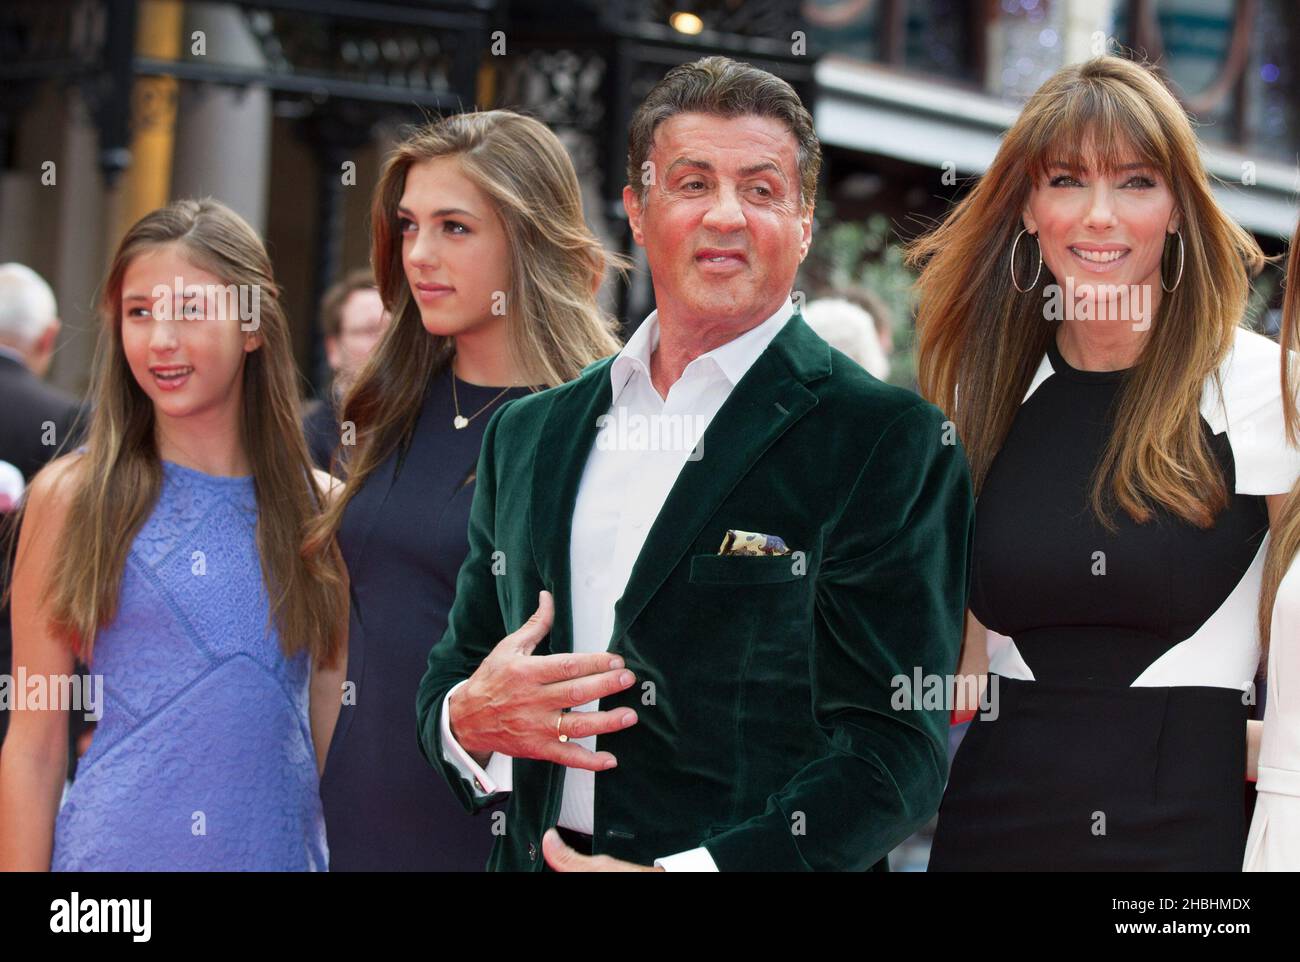 Sylvester Stallone and family attending the World Premiere of the Expendables 3 at The Odeon in Leicester Square in London. Stock Photo